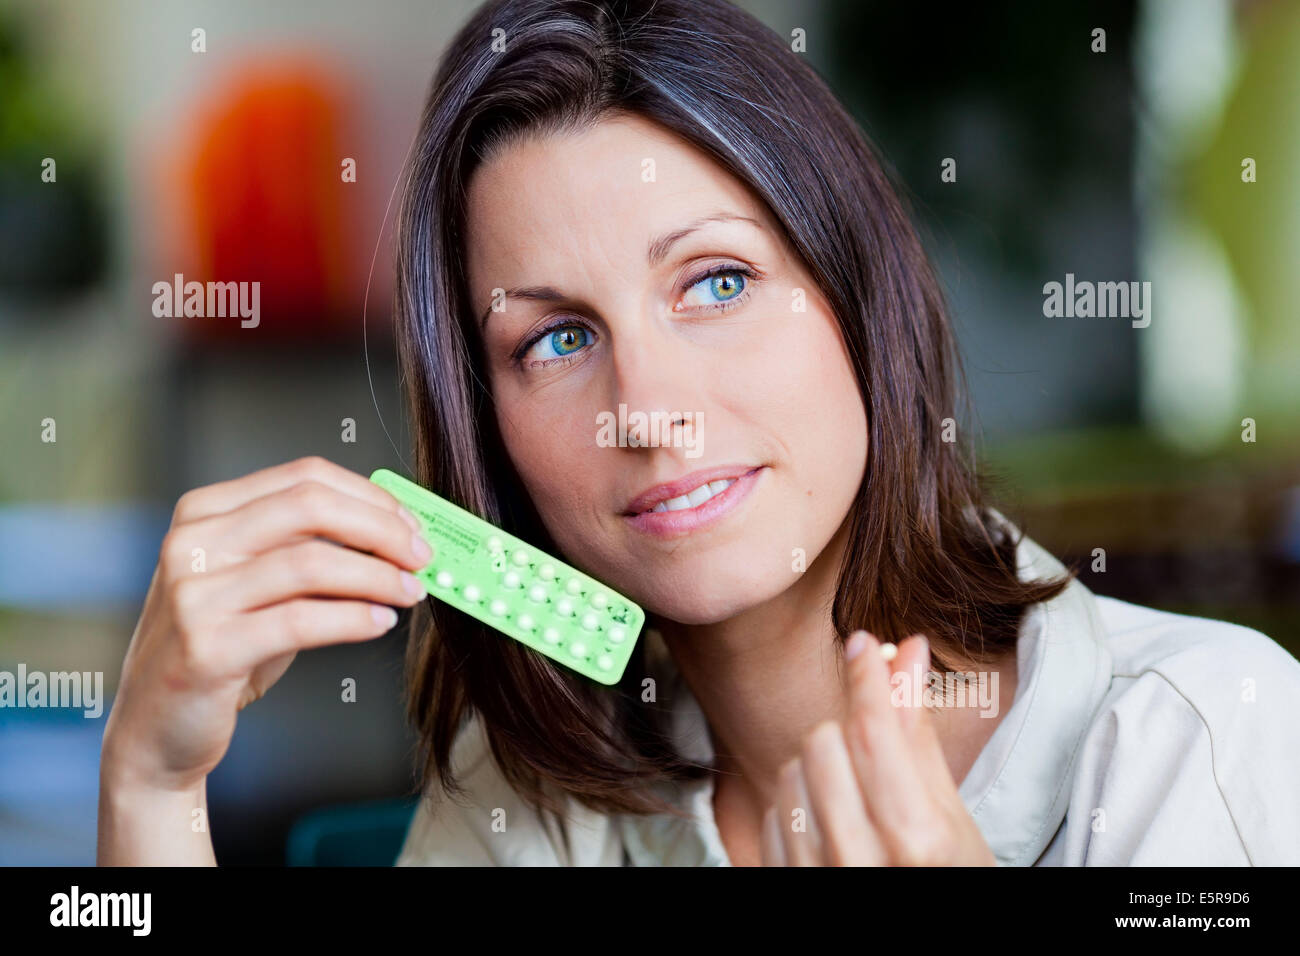 Woman with contraceptive pills. Stock Photo